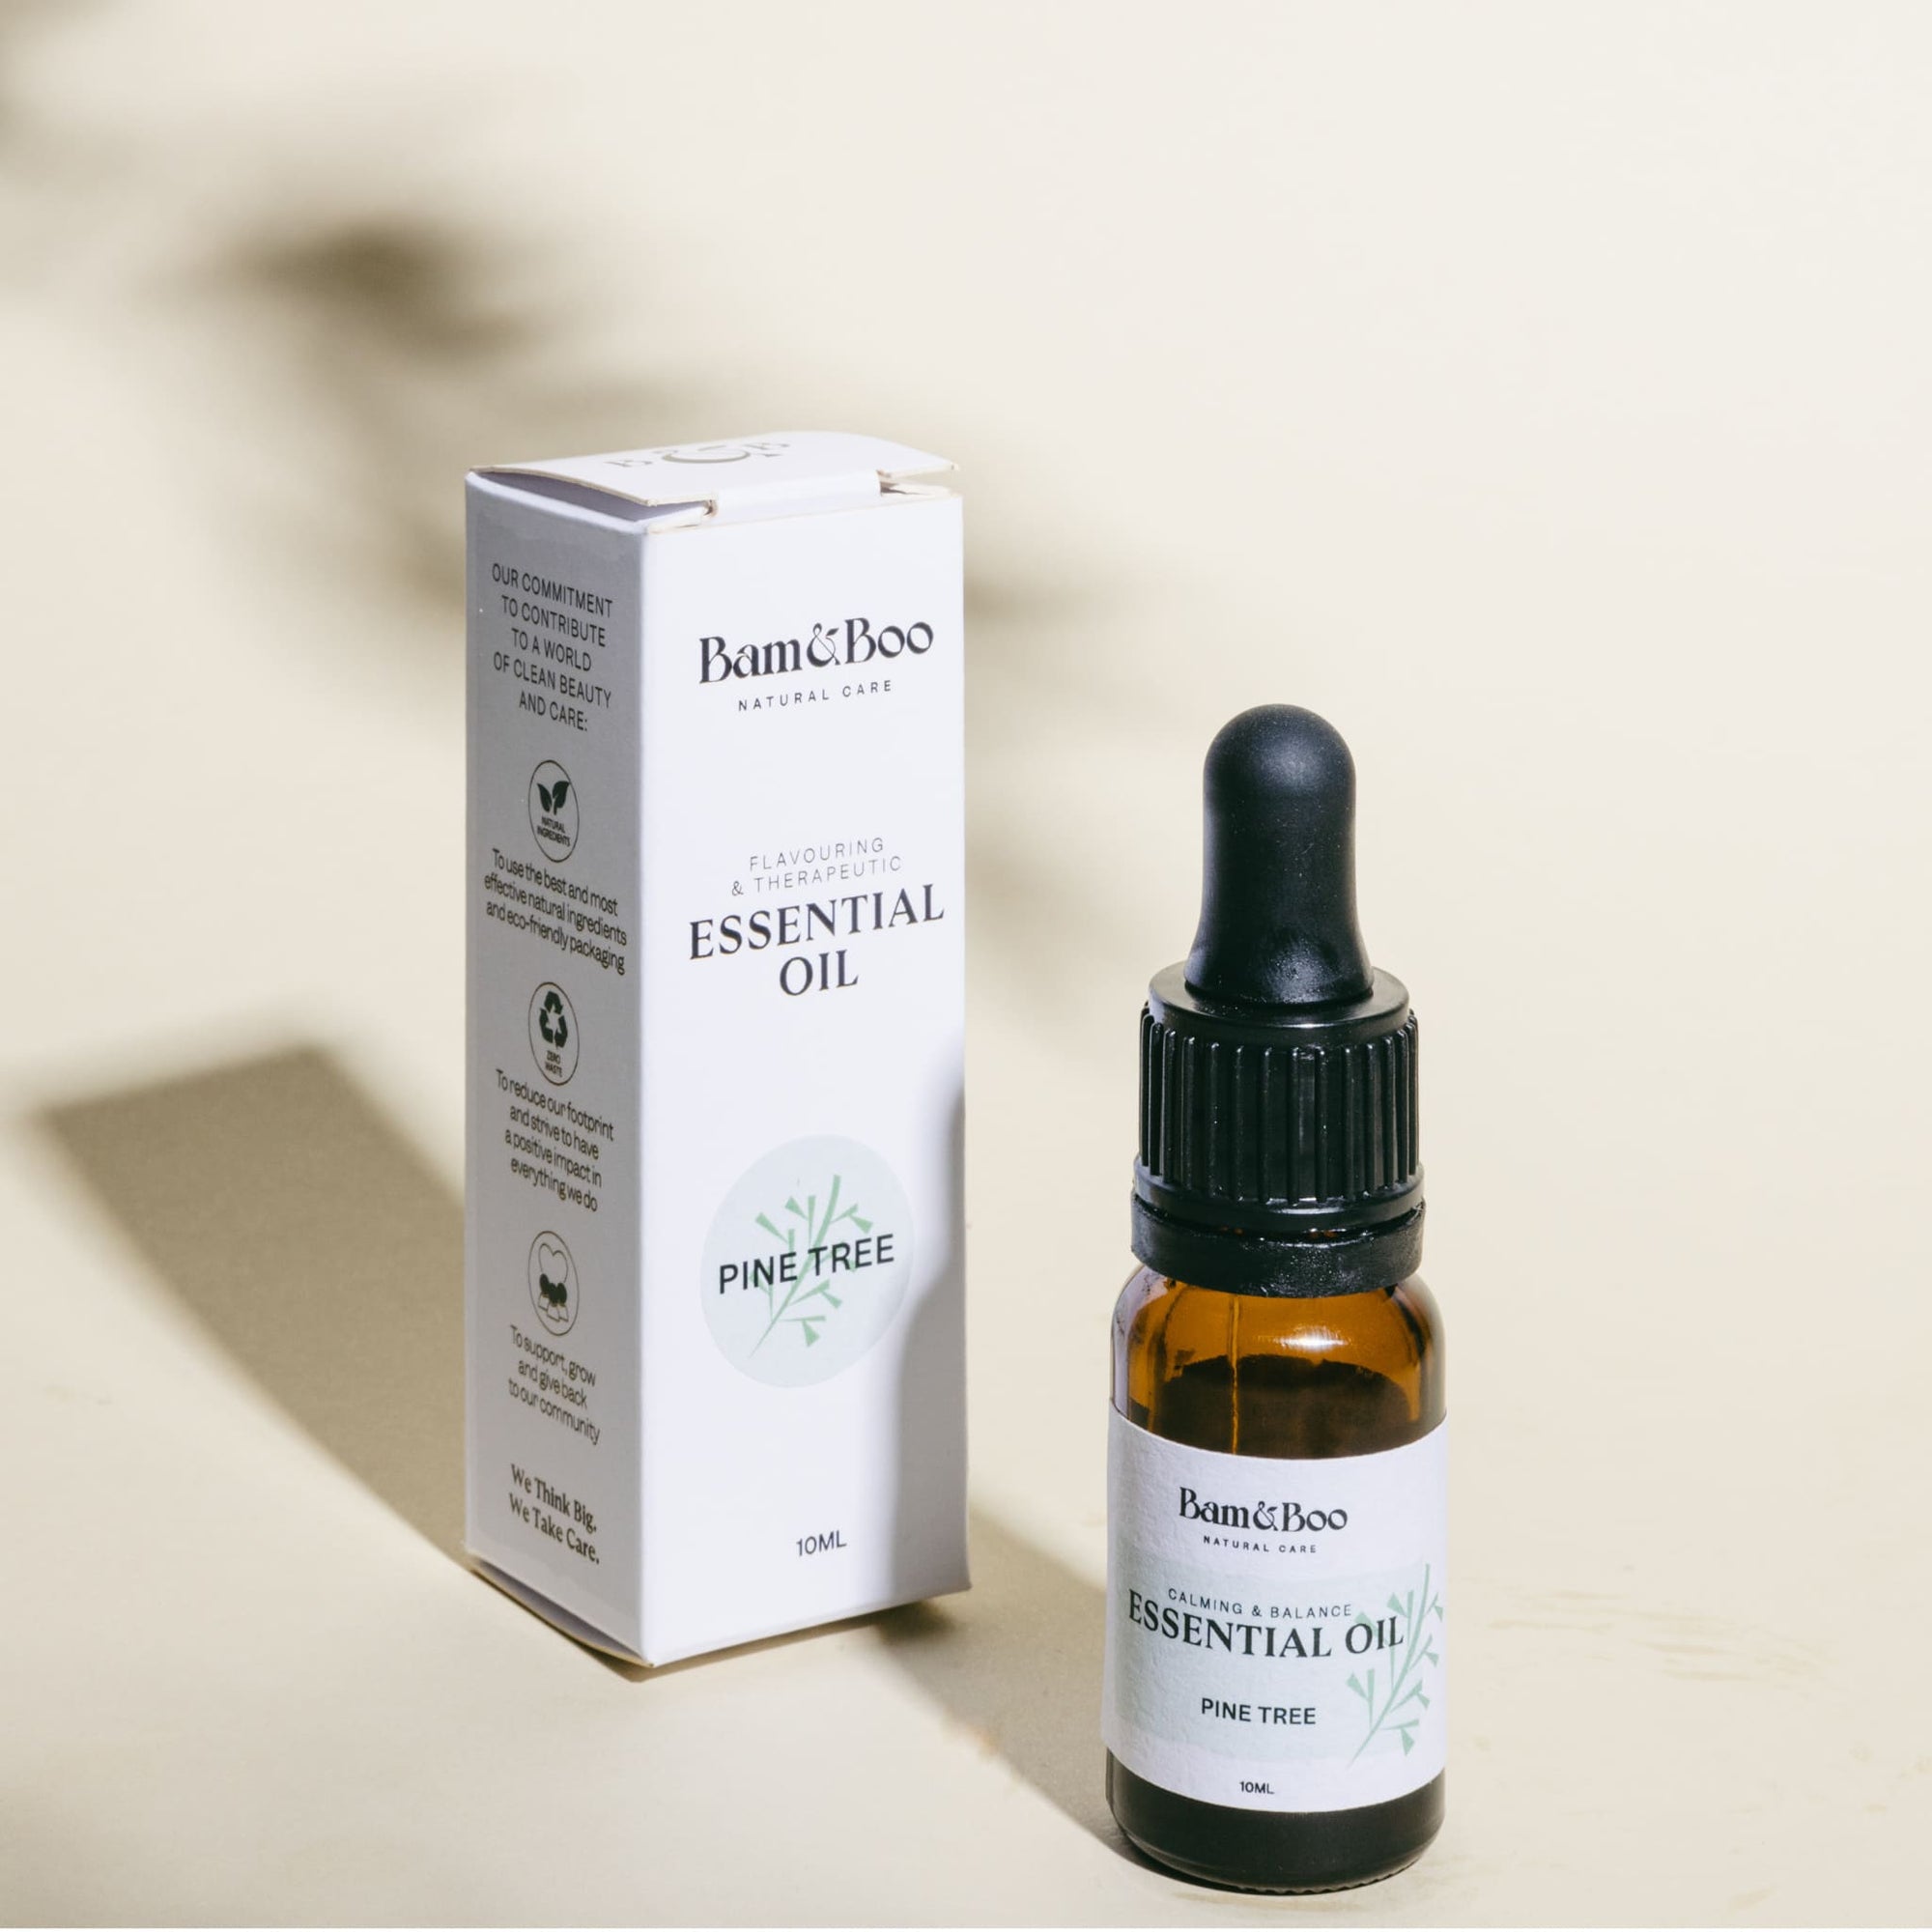 ESSENTIAL OIL | Pine Tree - Bam&Boo - Eco-friendly, vegan, sustainable oral and personal care